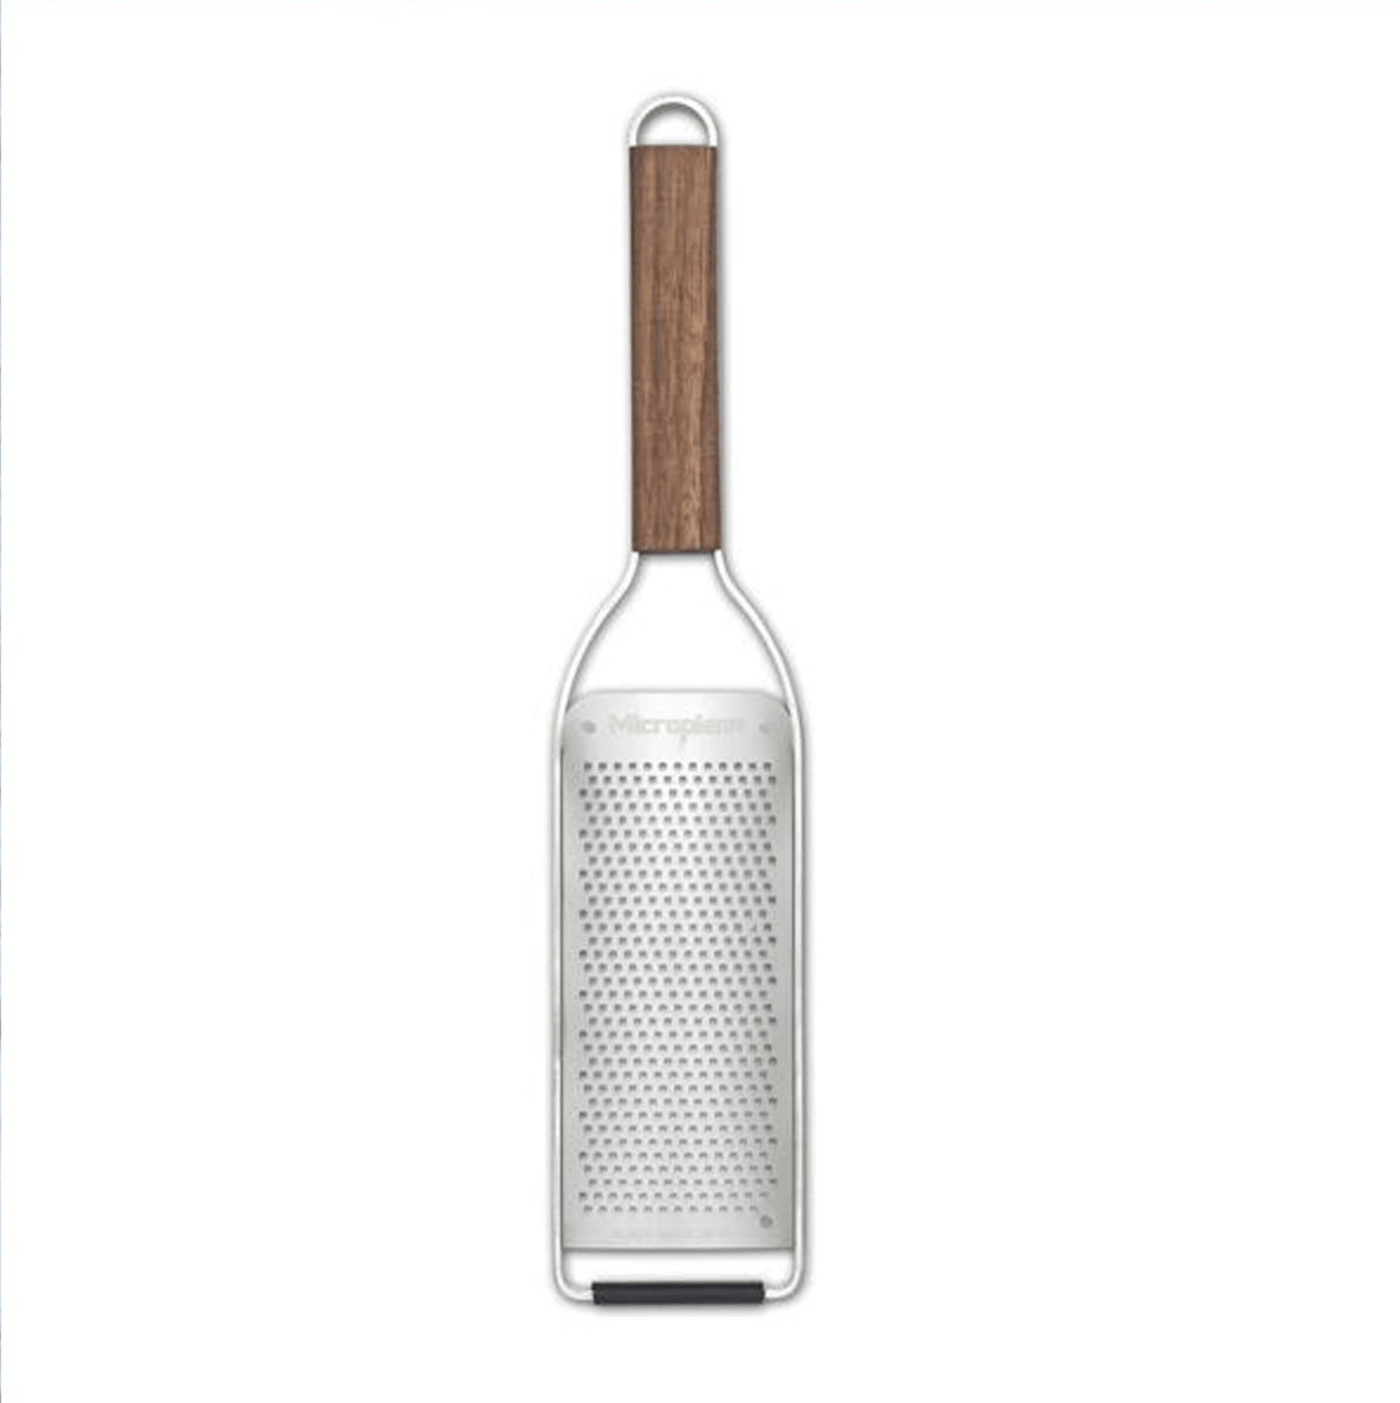 Blank Stainless Steel Cheese Grater Hand Grater Zester Kitchen